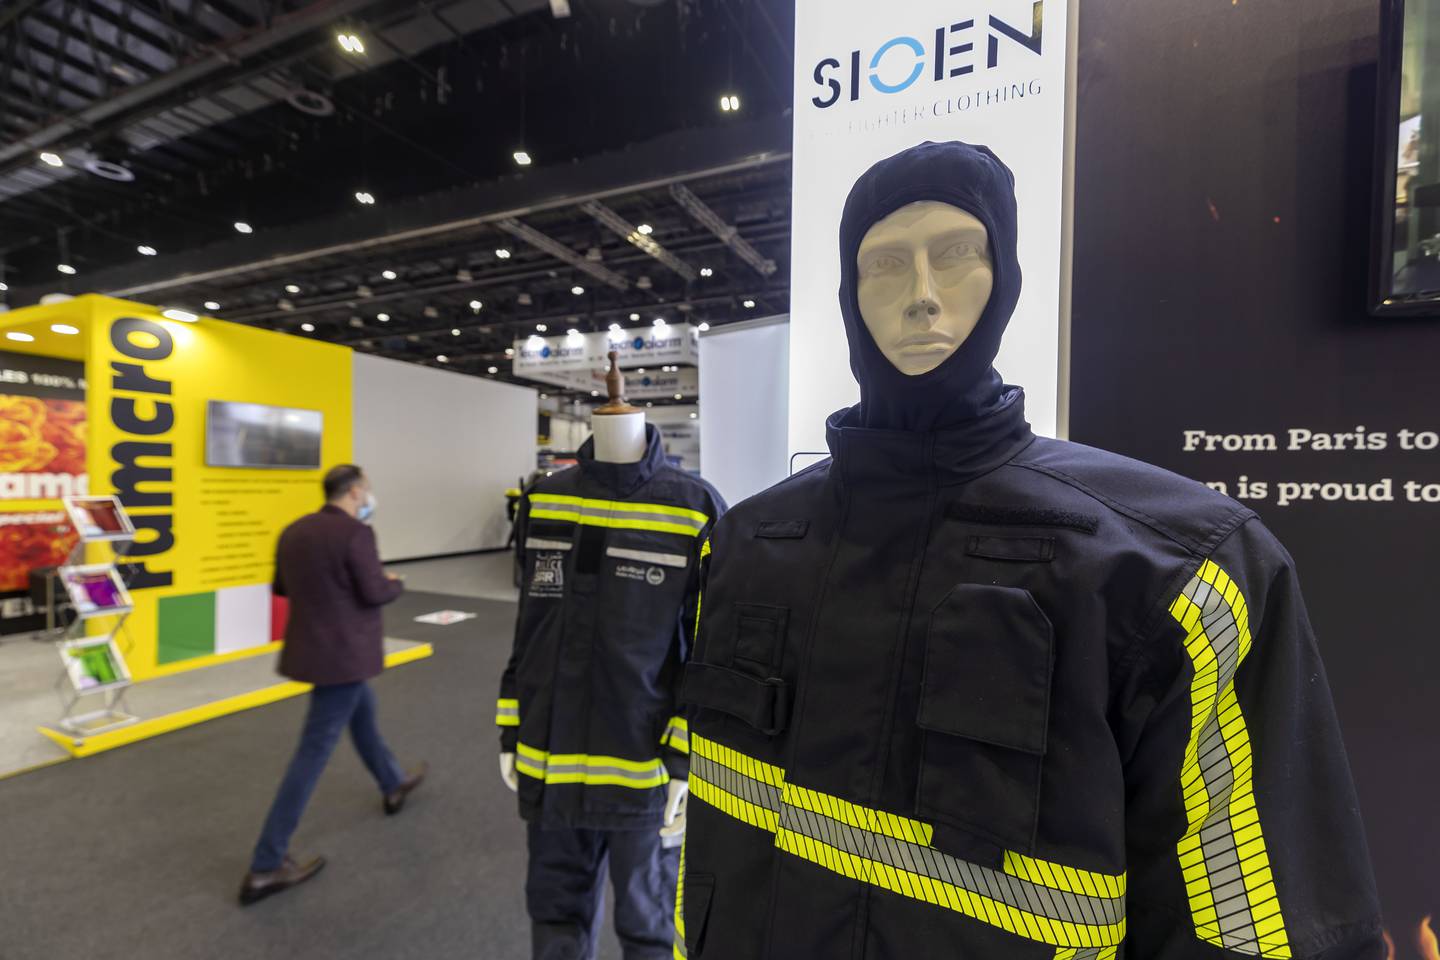 Firefighting equipment made by Sioen on display at Intersec 2022 at the Dubai World Trade Centre, January 18, 2022. Chris Whiteoak / The National